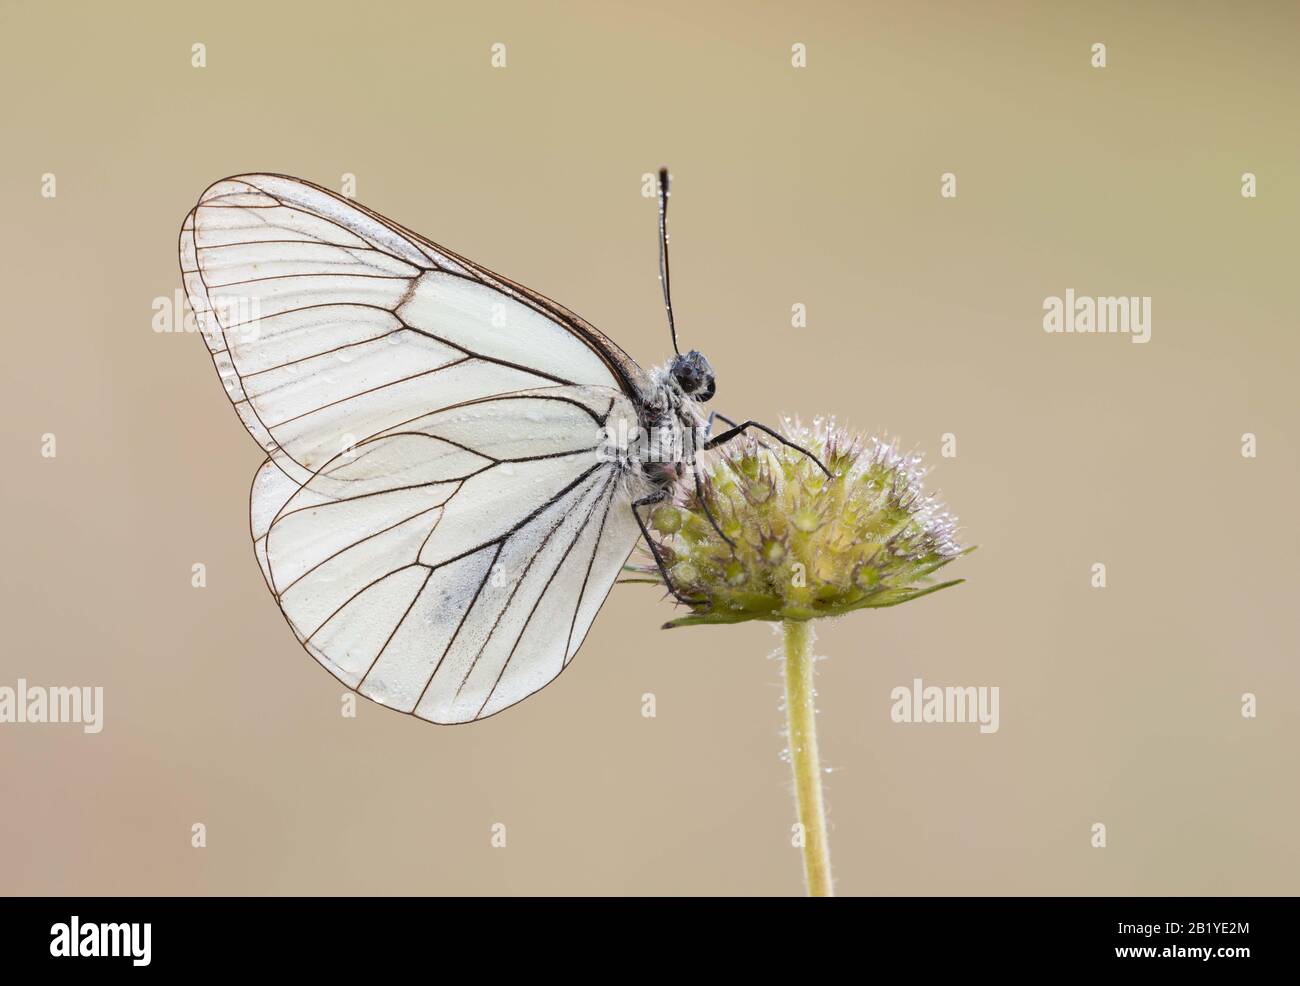 A Black-veined White butterfly (Aporia crataegi) roosting on a flowerhead. Taken early in the morning in a dewy meadow in Dordogne, Southern France. Stock Photo